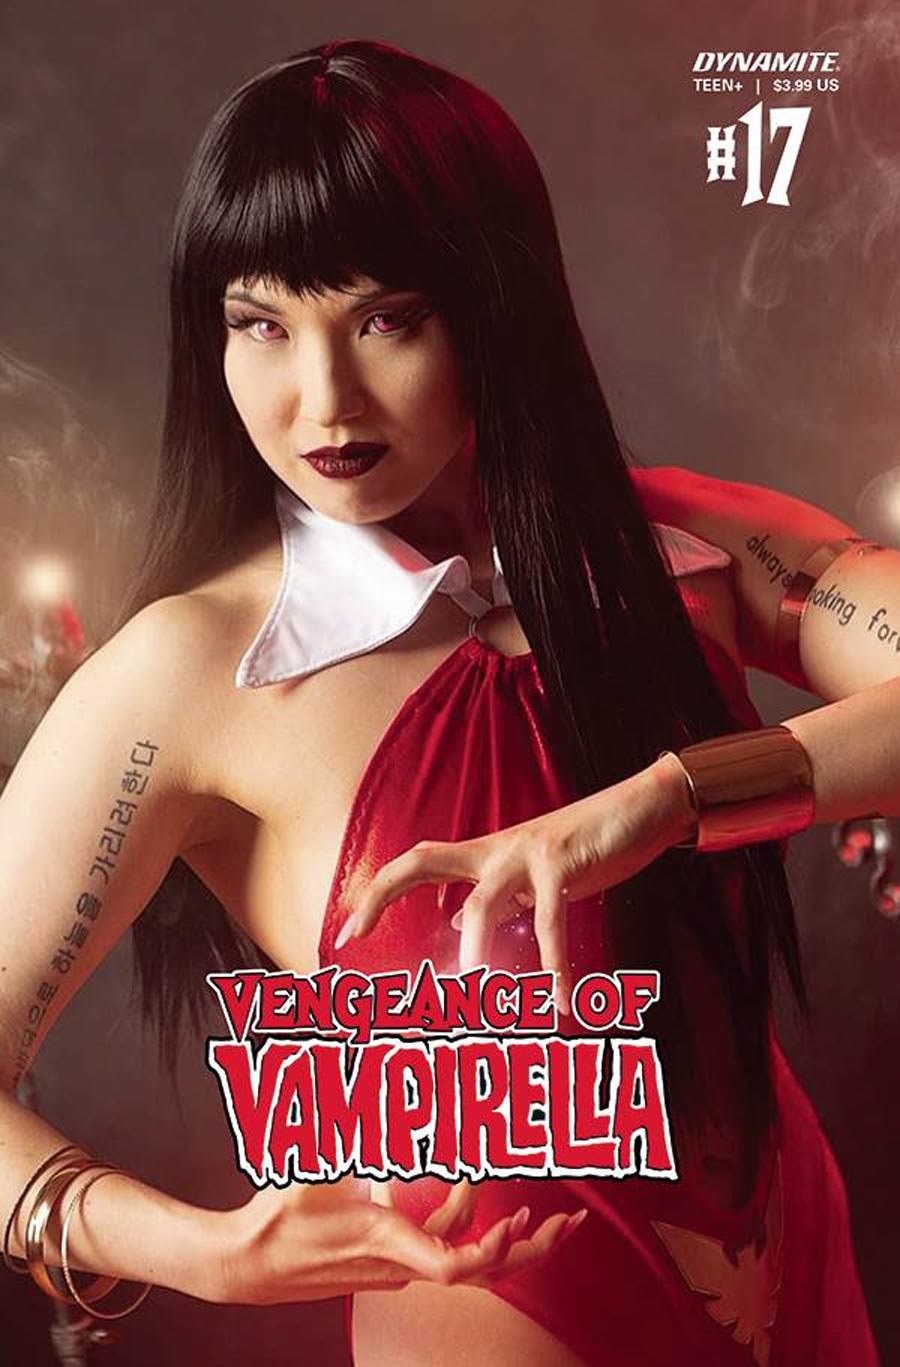 Vengeance Of Vampirella Vol 2 #17 Cover D Variant Sarah Stalcup Cosplay Photo Cover